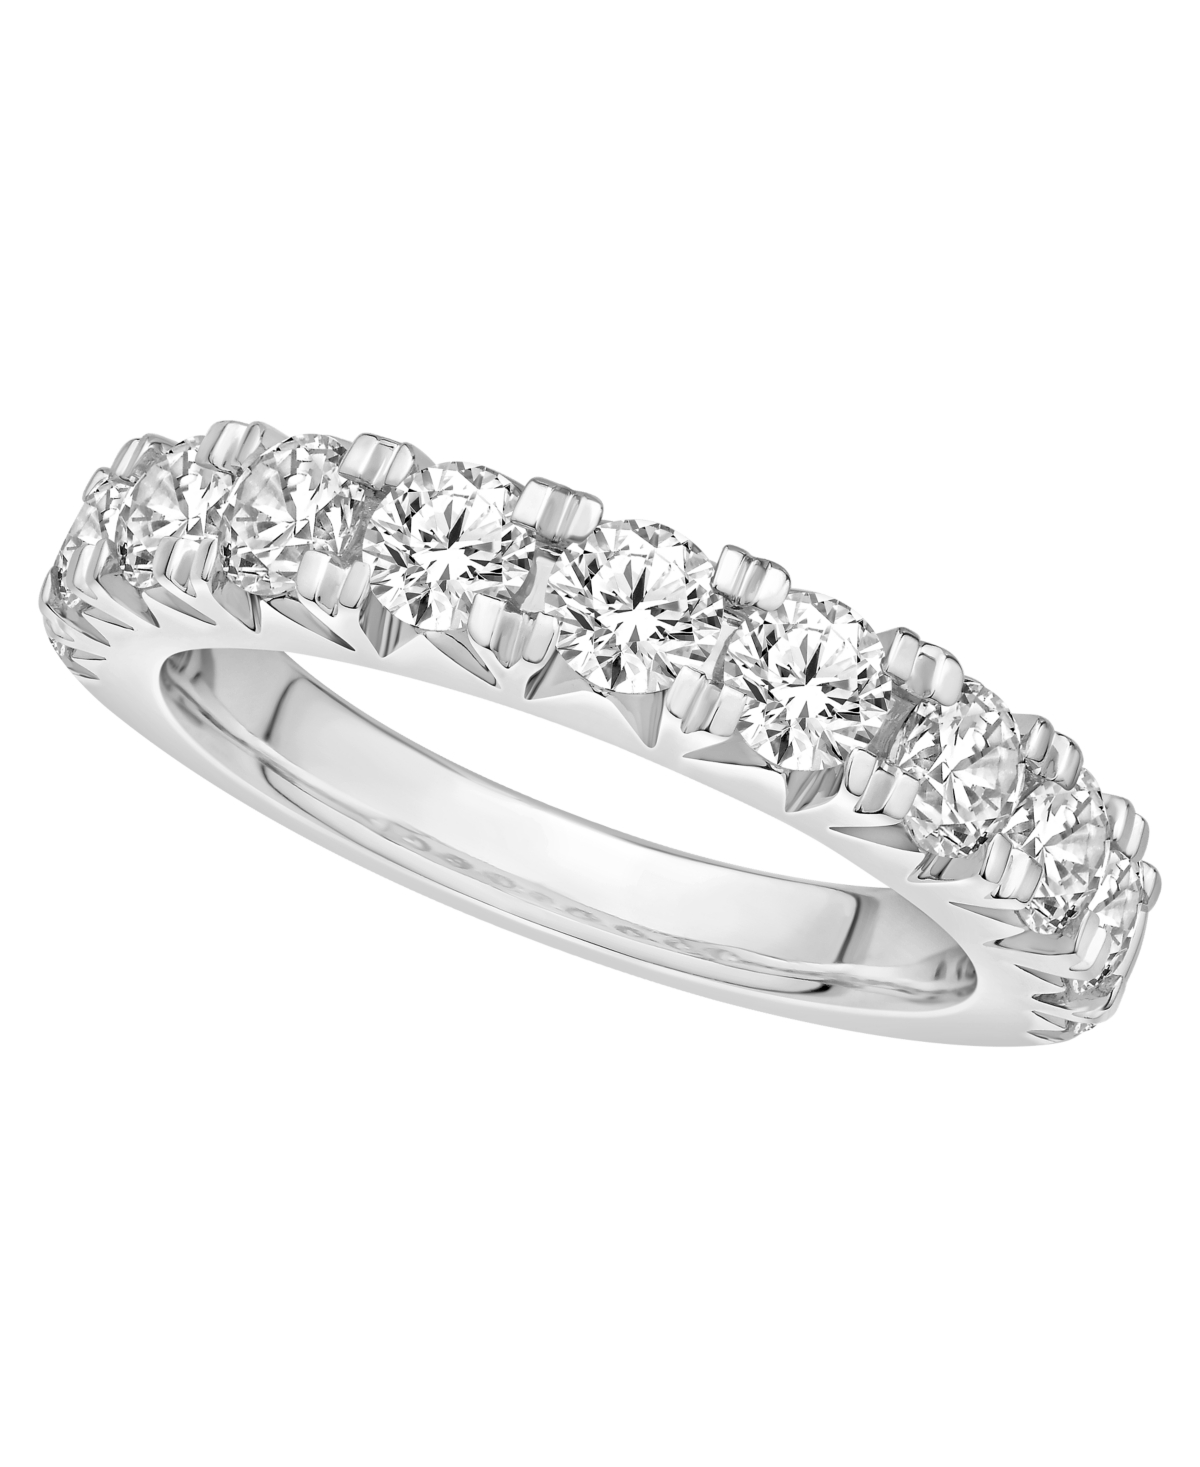 Certified Diamond Pave Band (1 1/2 ct. t.w.) in 14K White Gold or Yellow Gold - White Gold